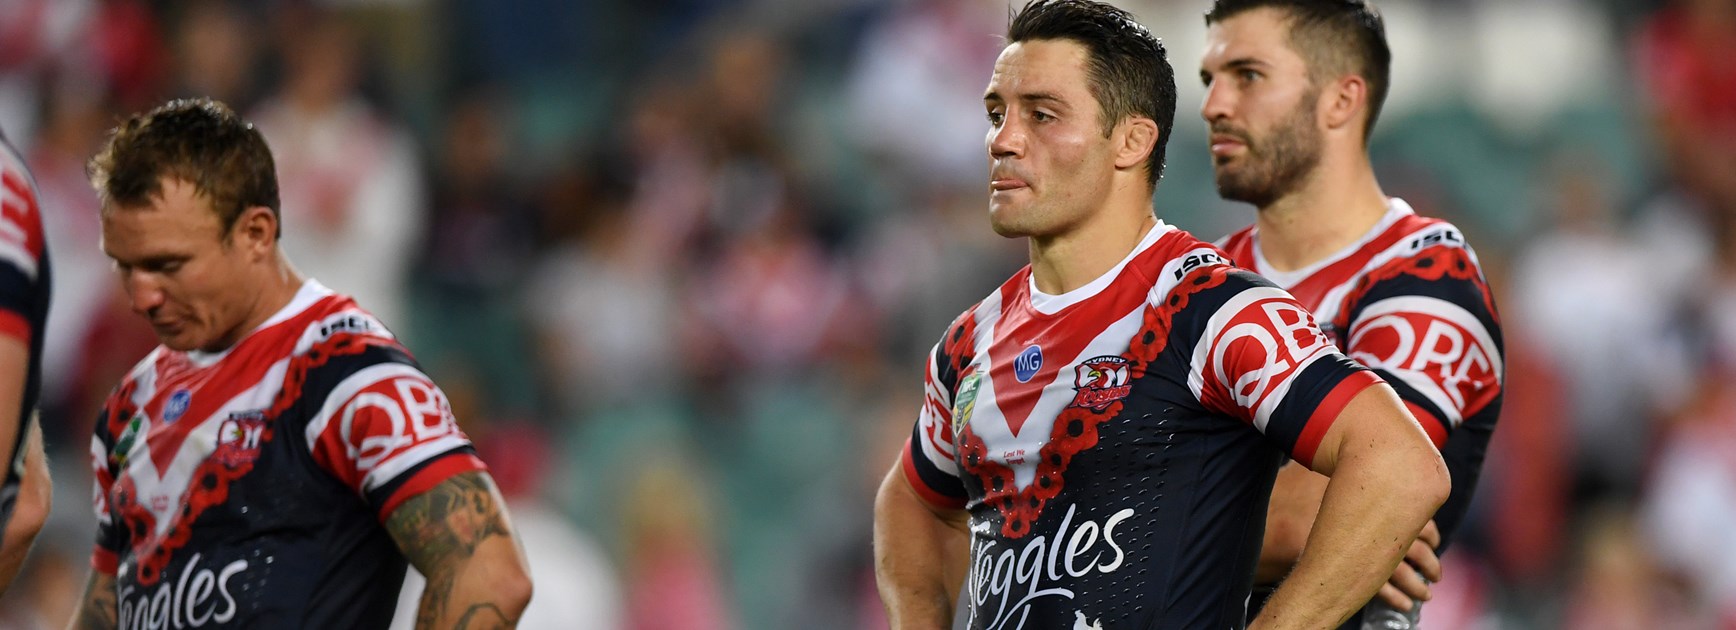 Cooper Cronk and the Roosters on Anzac Day.